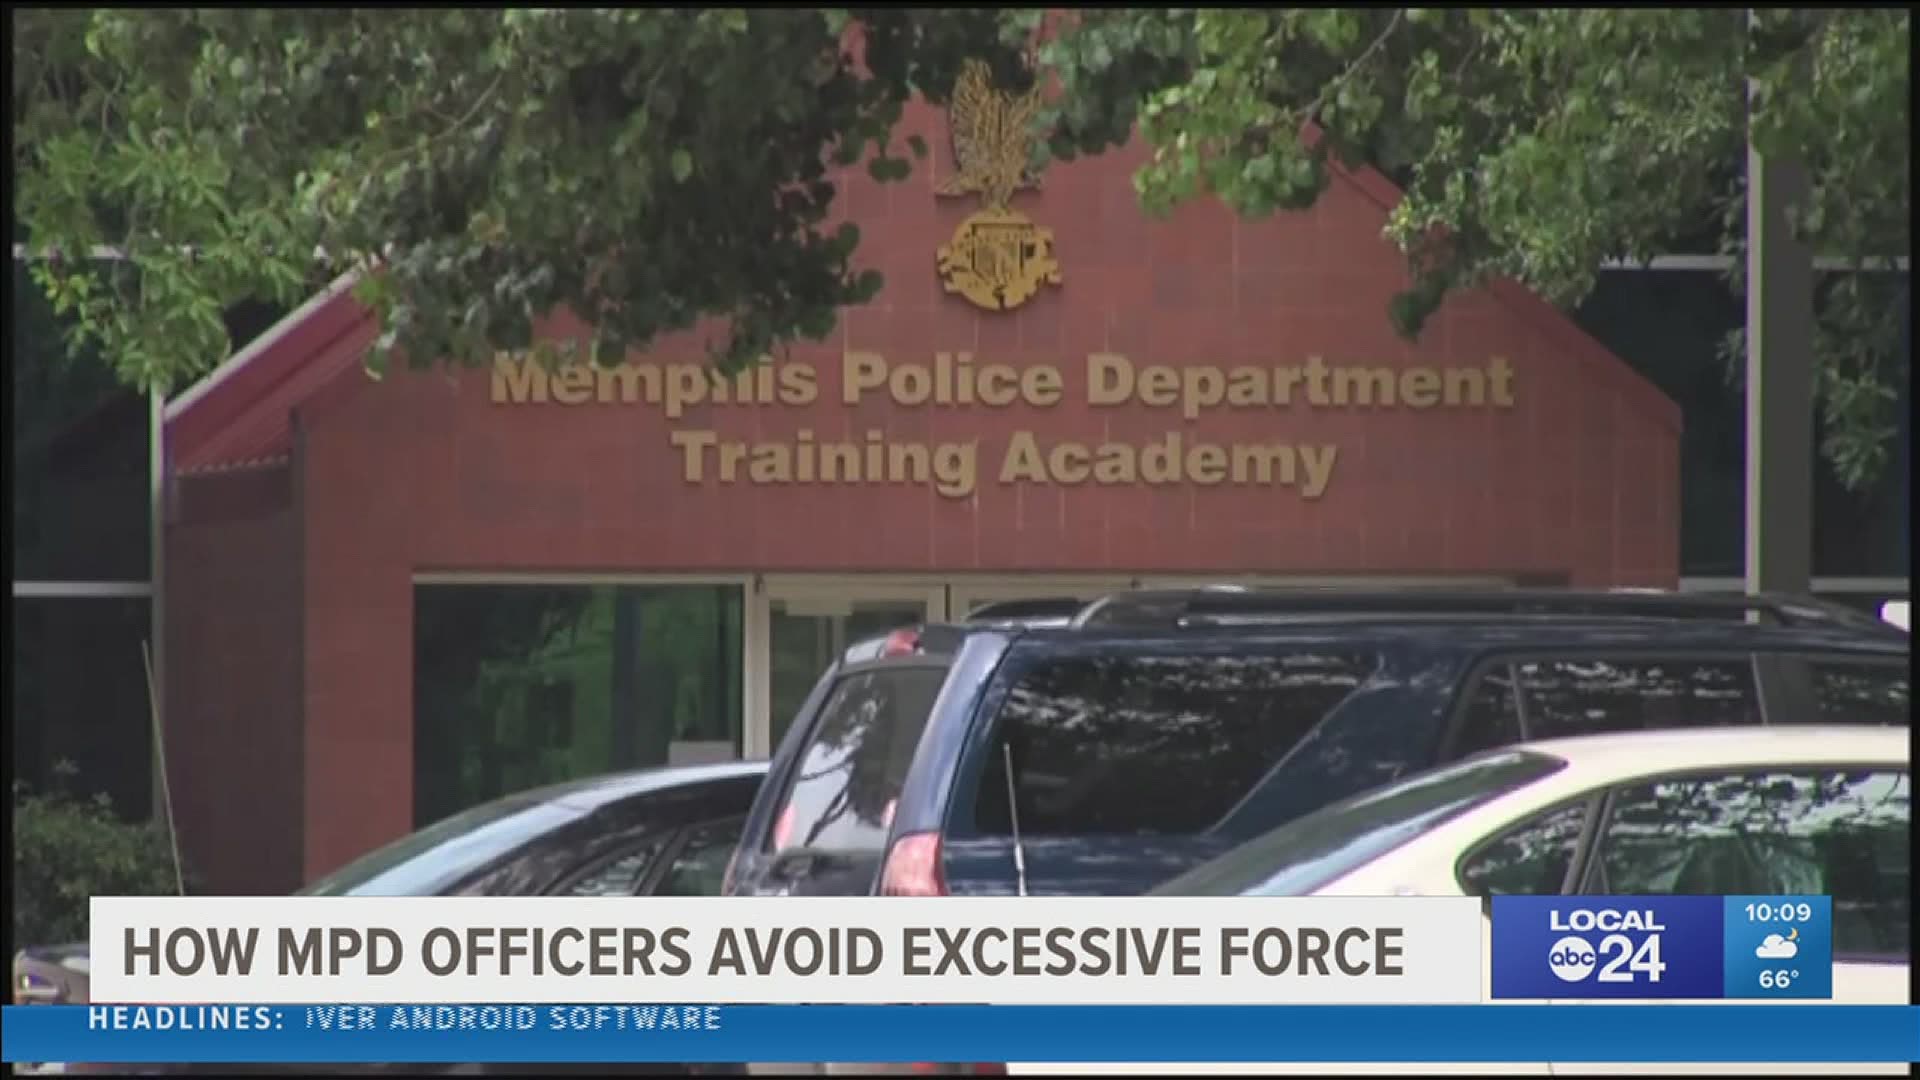 Memphis Police Department has ongoing training, especially when it comes to de-escalation tactics to avoid using excessive force.